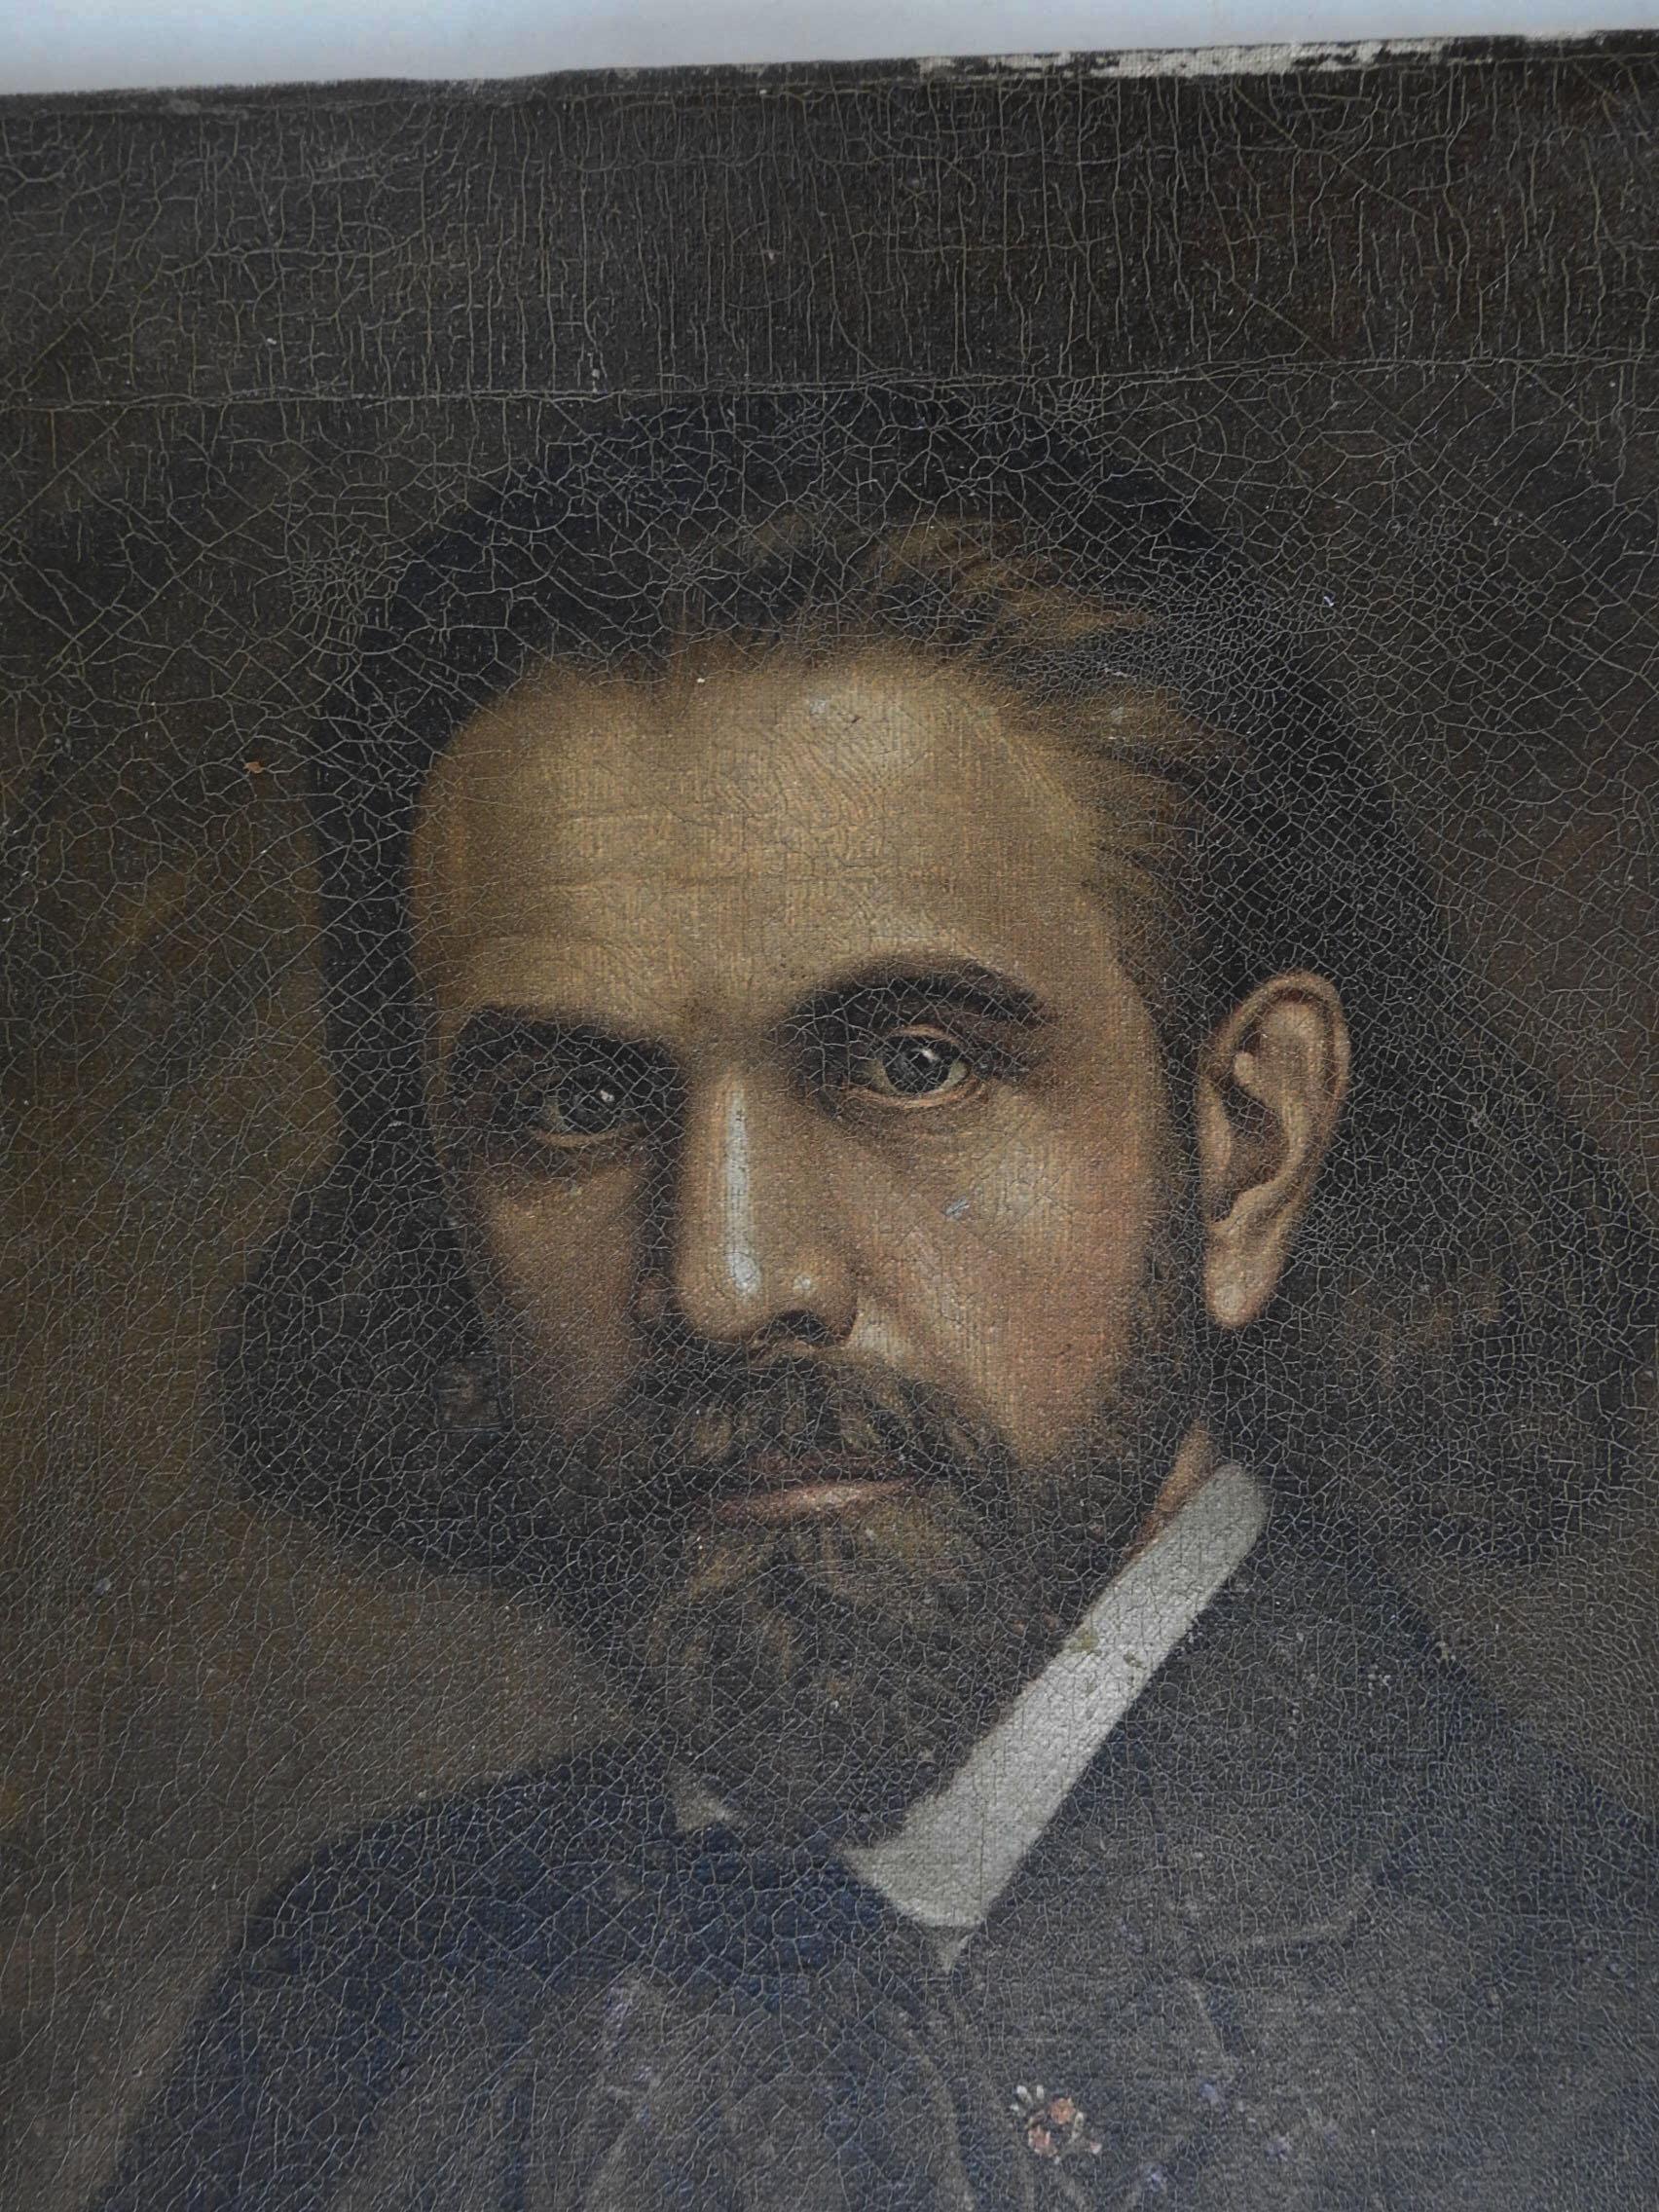 Vintage circa 1920s print on canvas. From a portrait painting of B.J. Palmer by A.J. Day, print on canvas with varnish finish. B.J. Palmer was the son of the founder of Chiropractic, these seem to have been given to alumni of the school Fountain